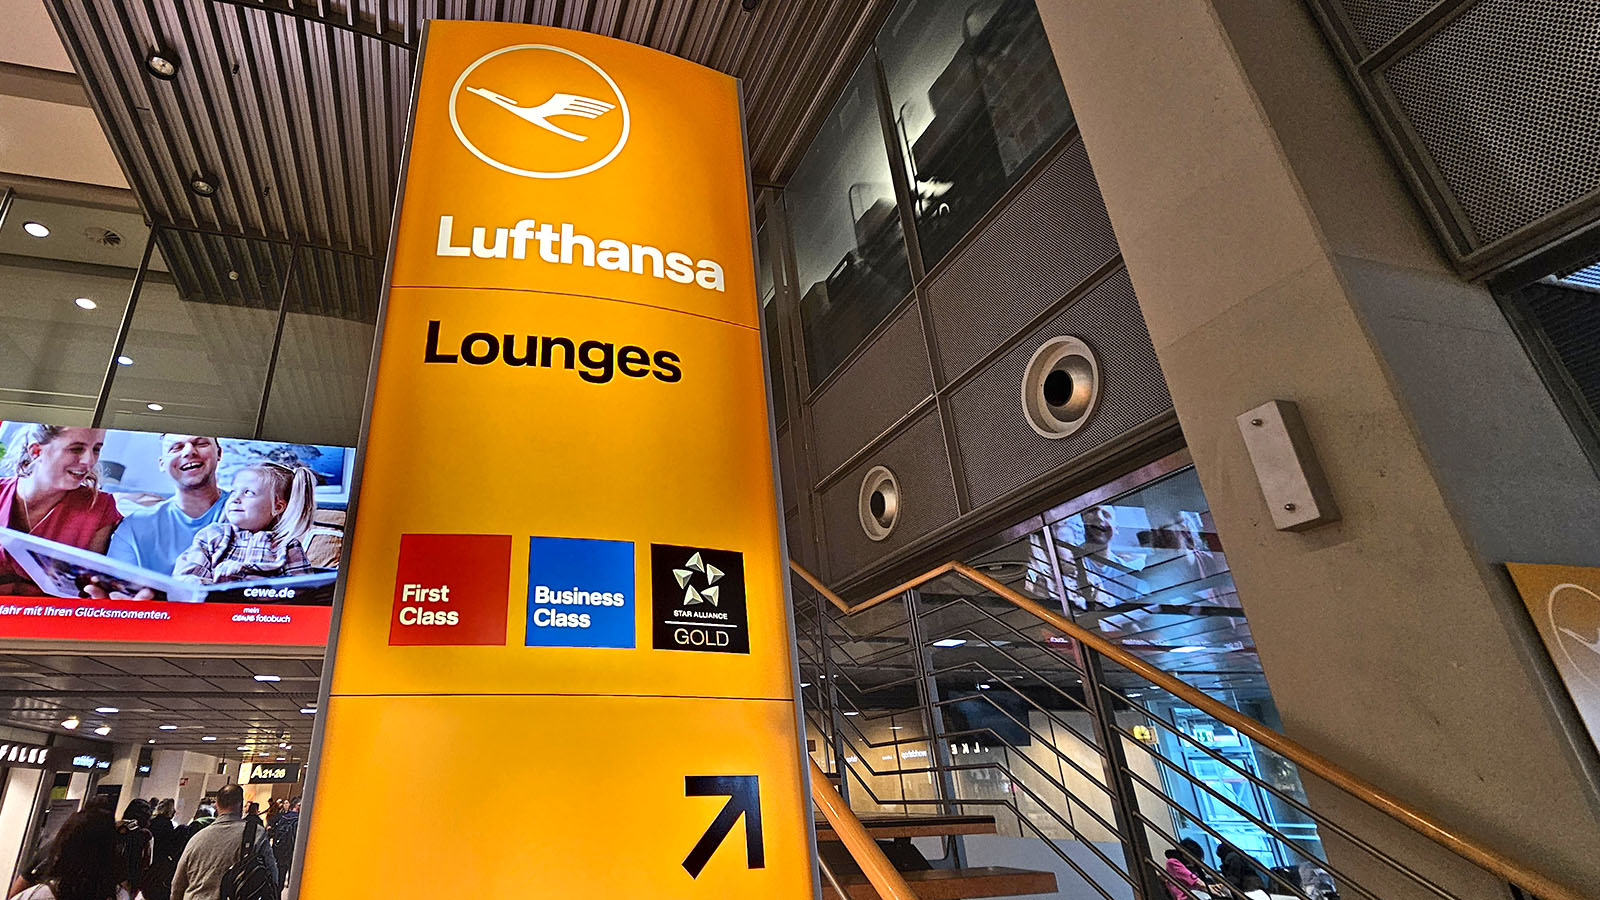 Visit the Lufthansa lounges courtesy of American Express